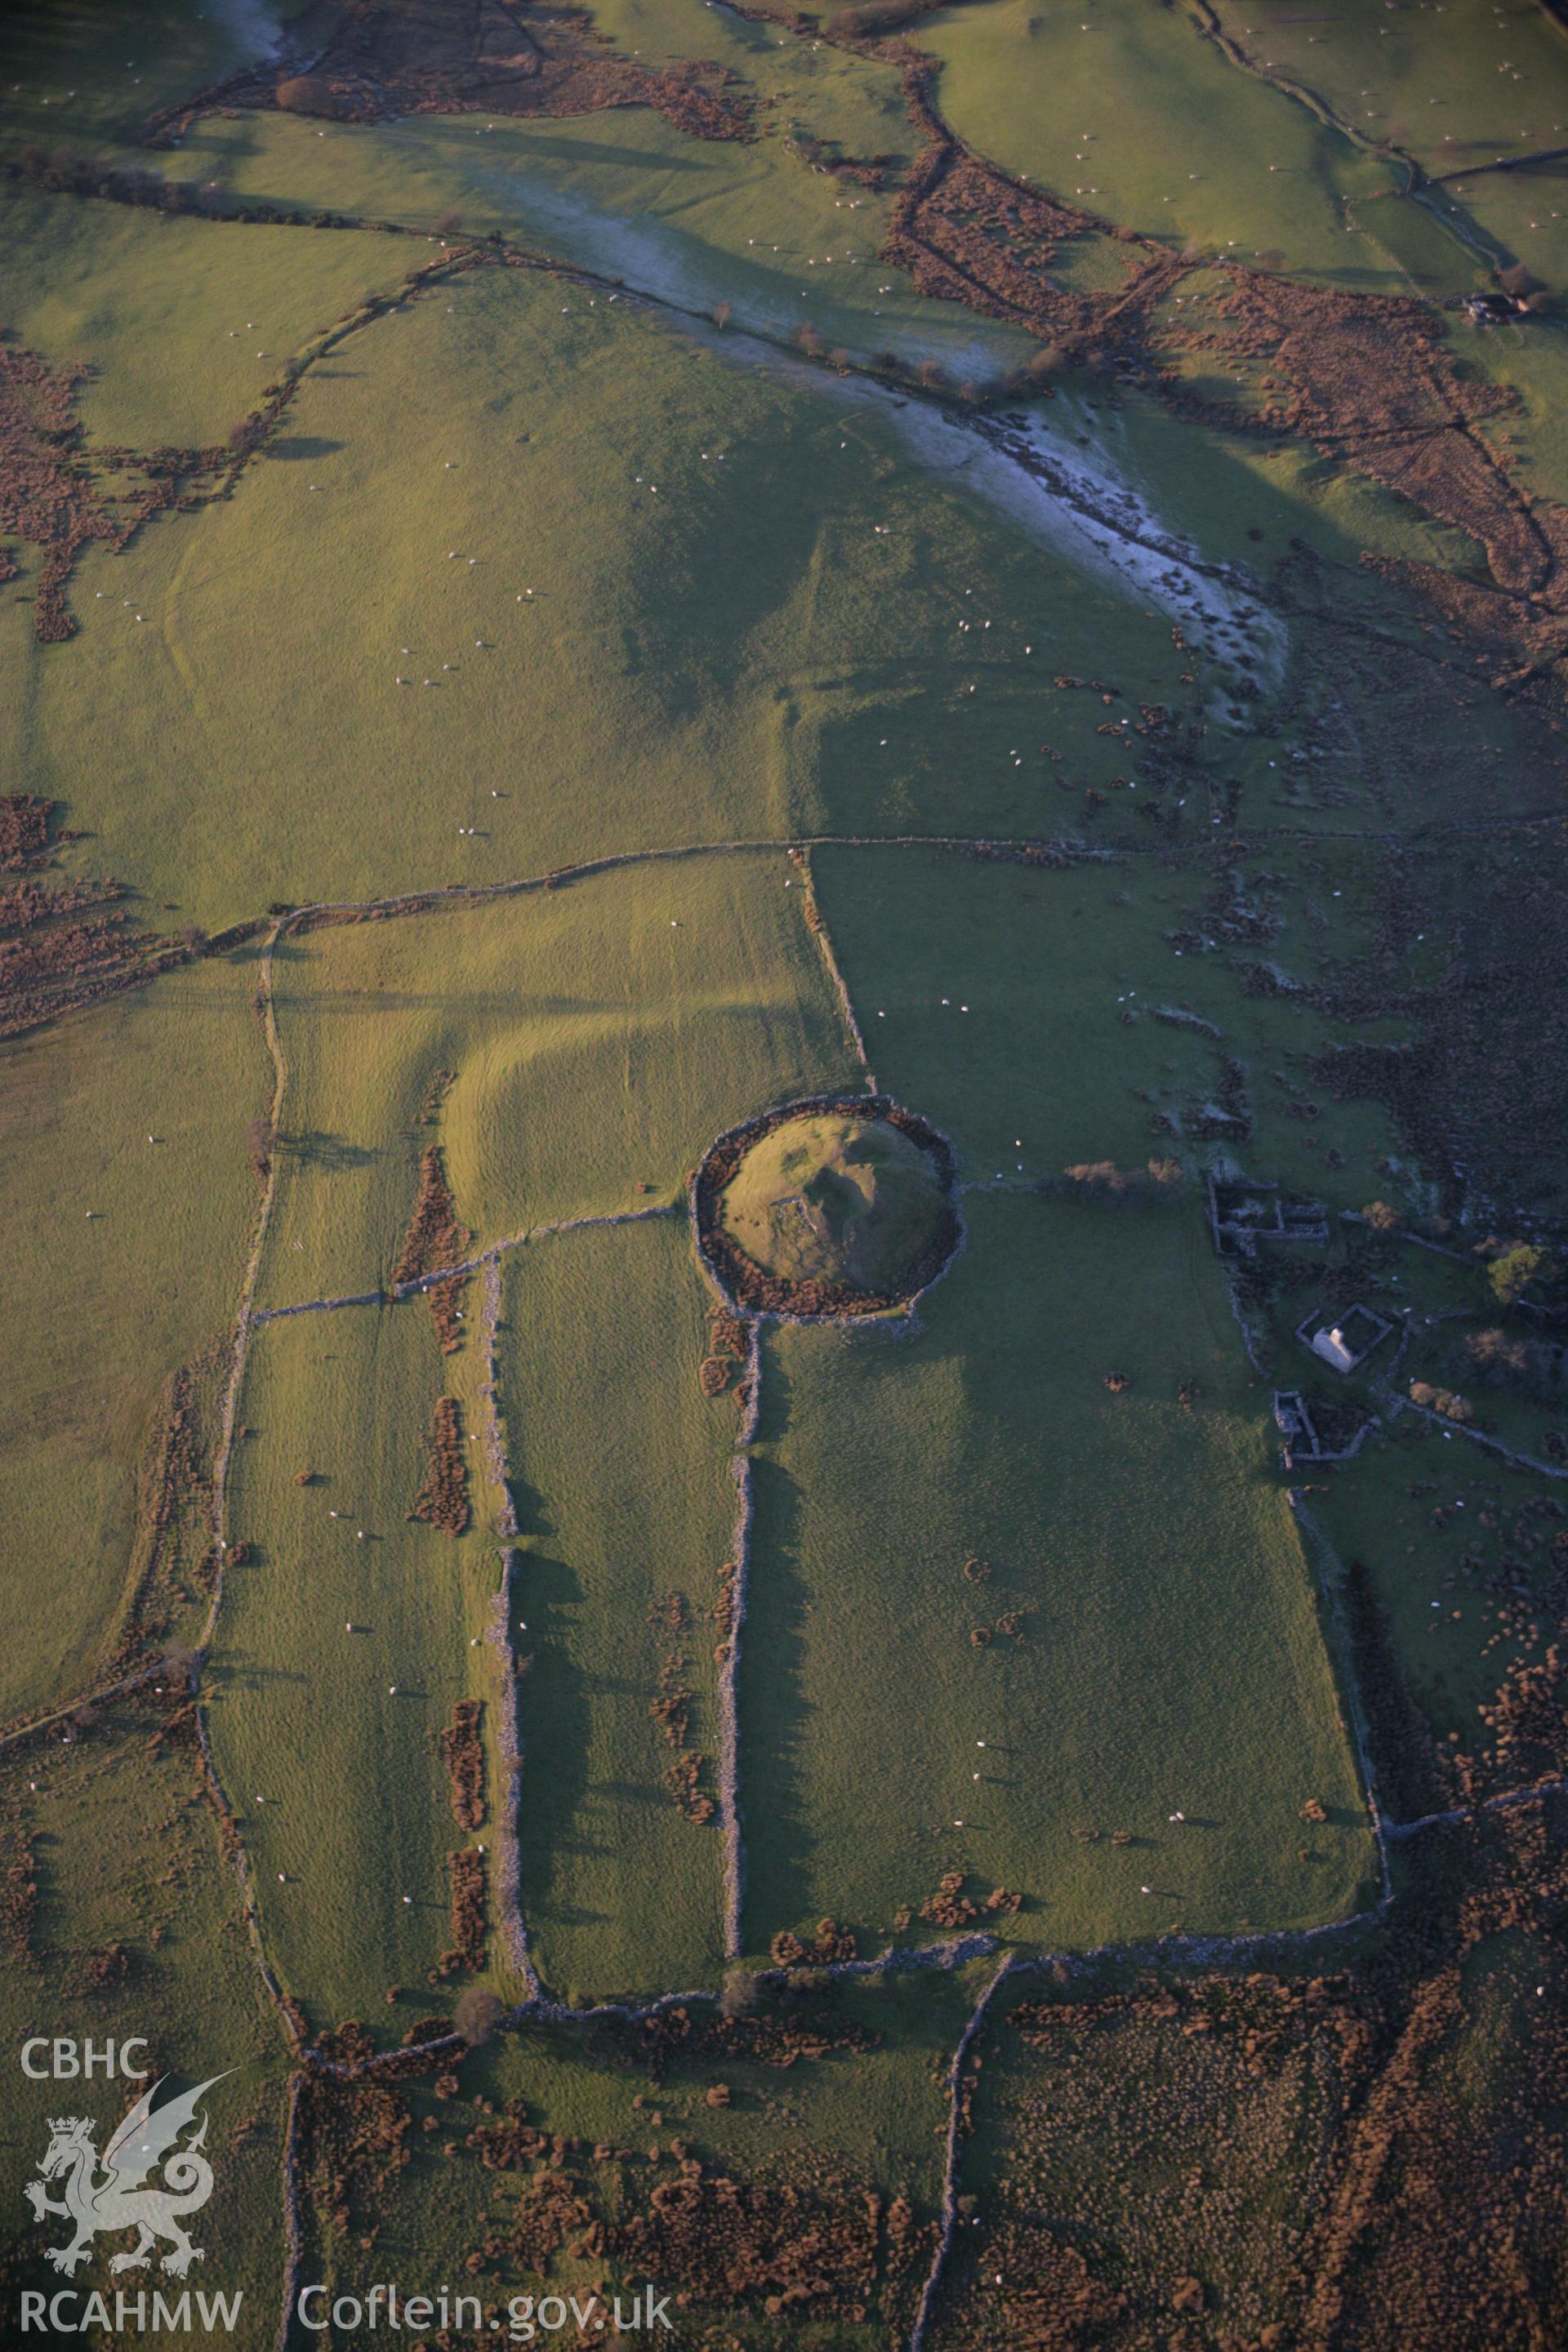 RCAHMW colour oblique aerial photograph of Tomen y Mur Roman Military Settlement. A view of the fort with the earthworks of the headquarter's building showing. Taken on 21 November 2005 by Toby Driver